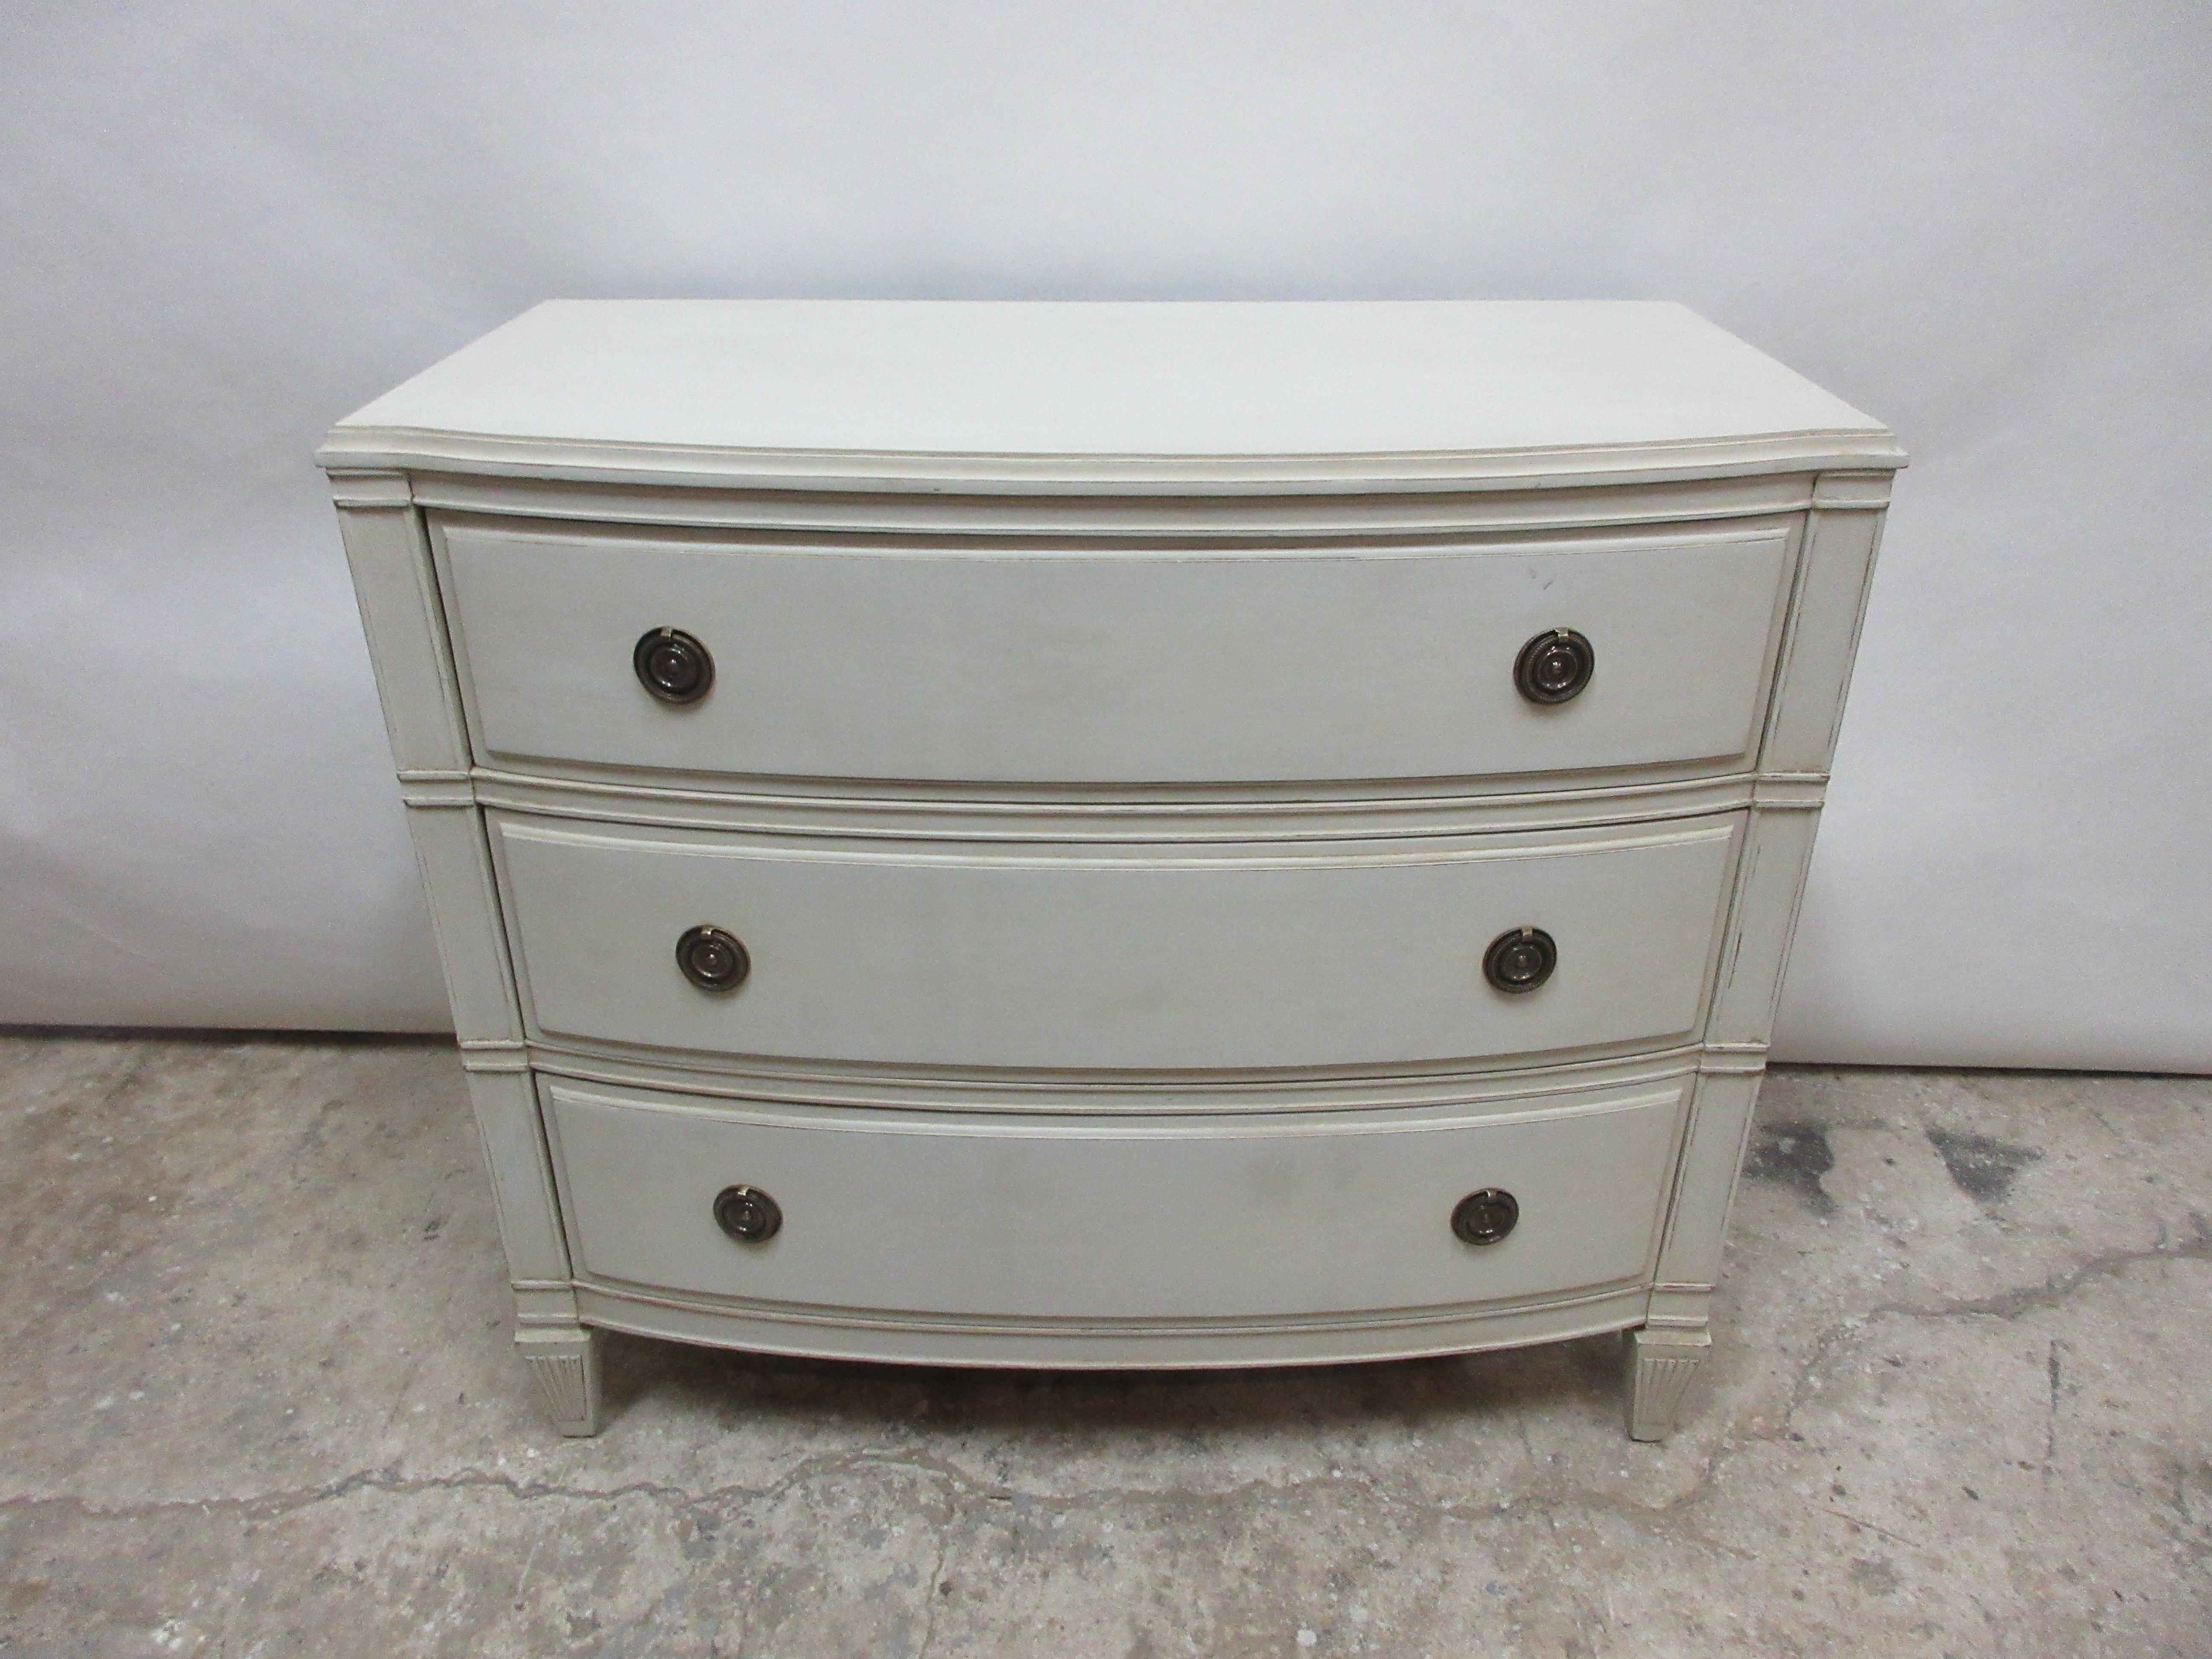 This is a Swedish Gustavian chest of drawers. It has been restored and repainted with milk paints 